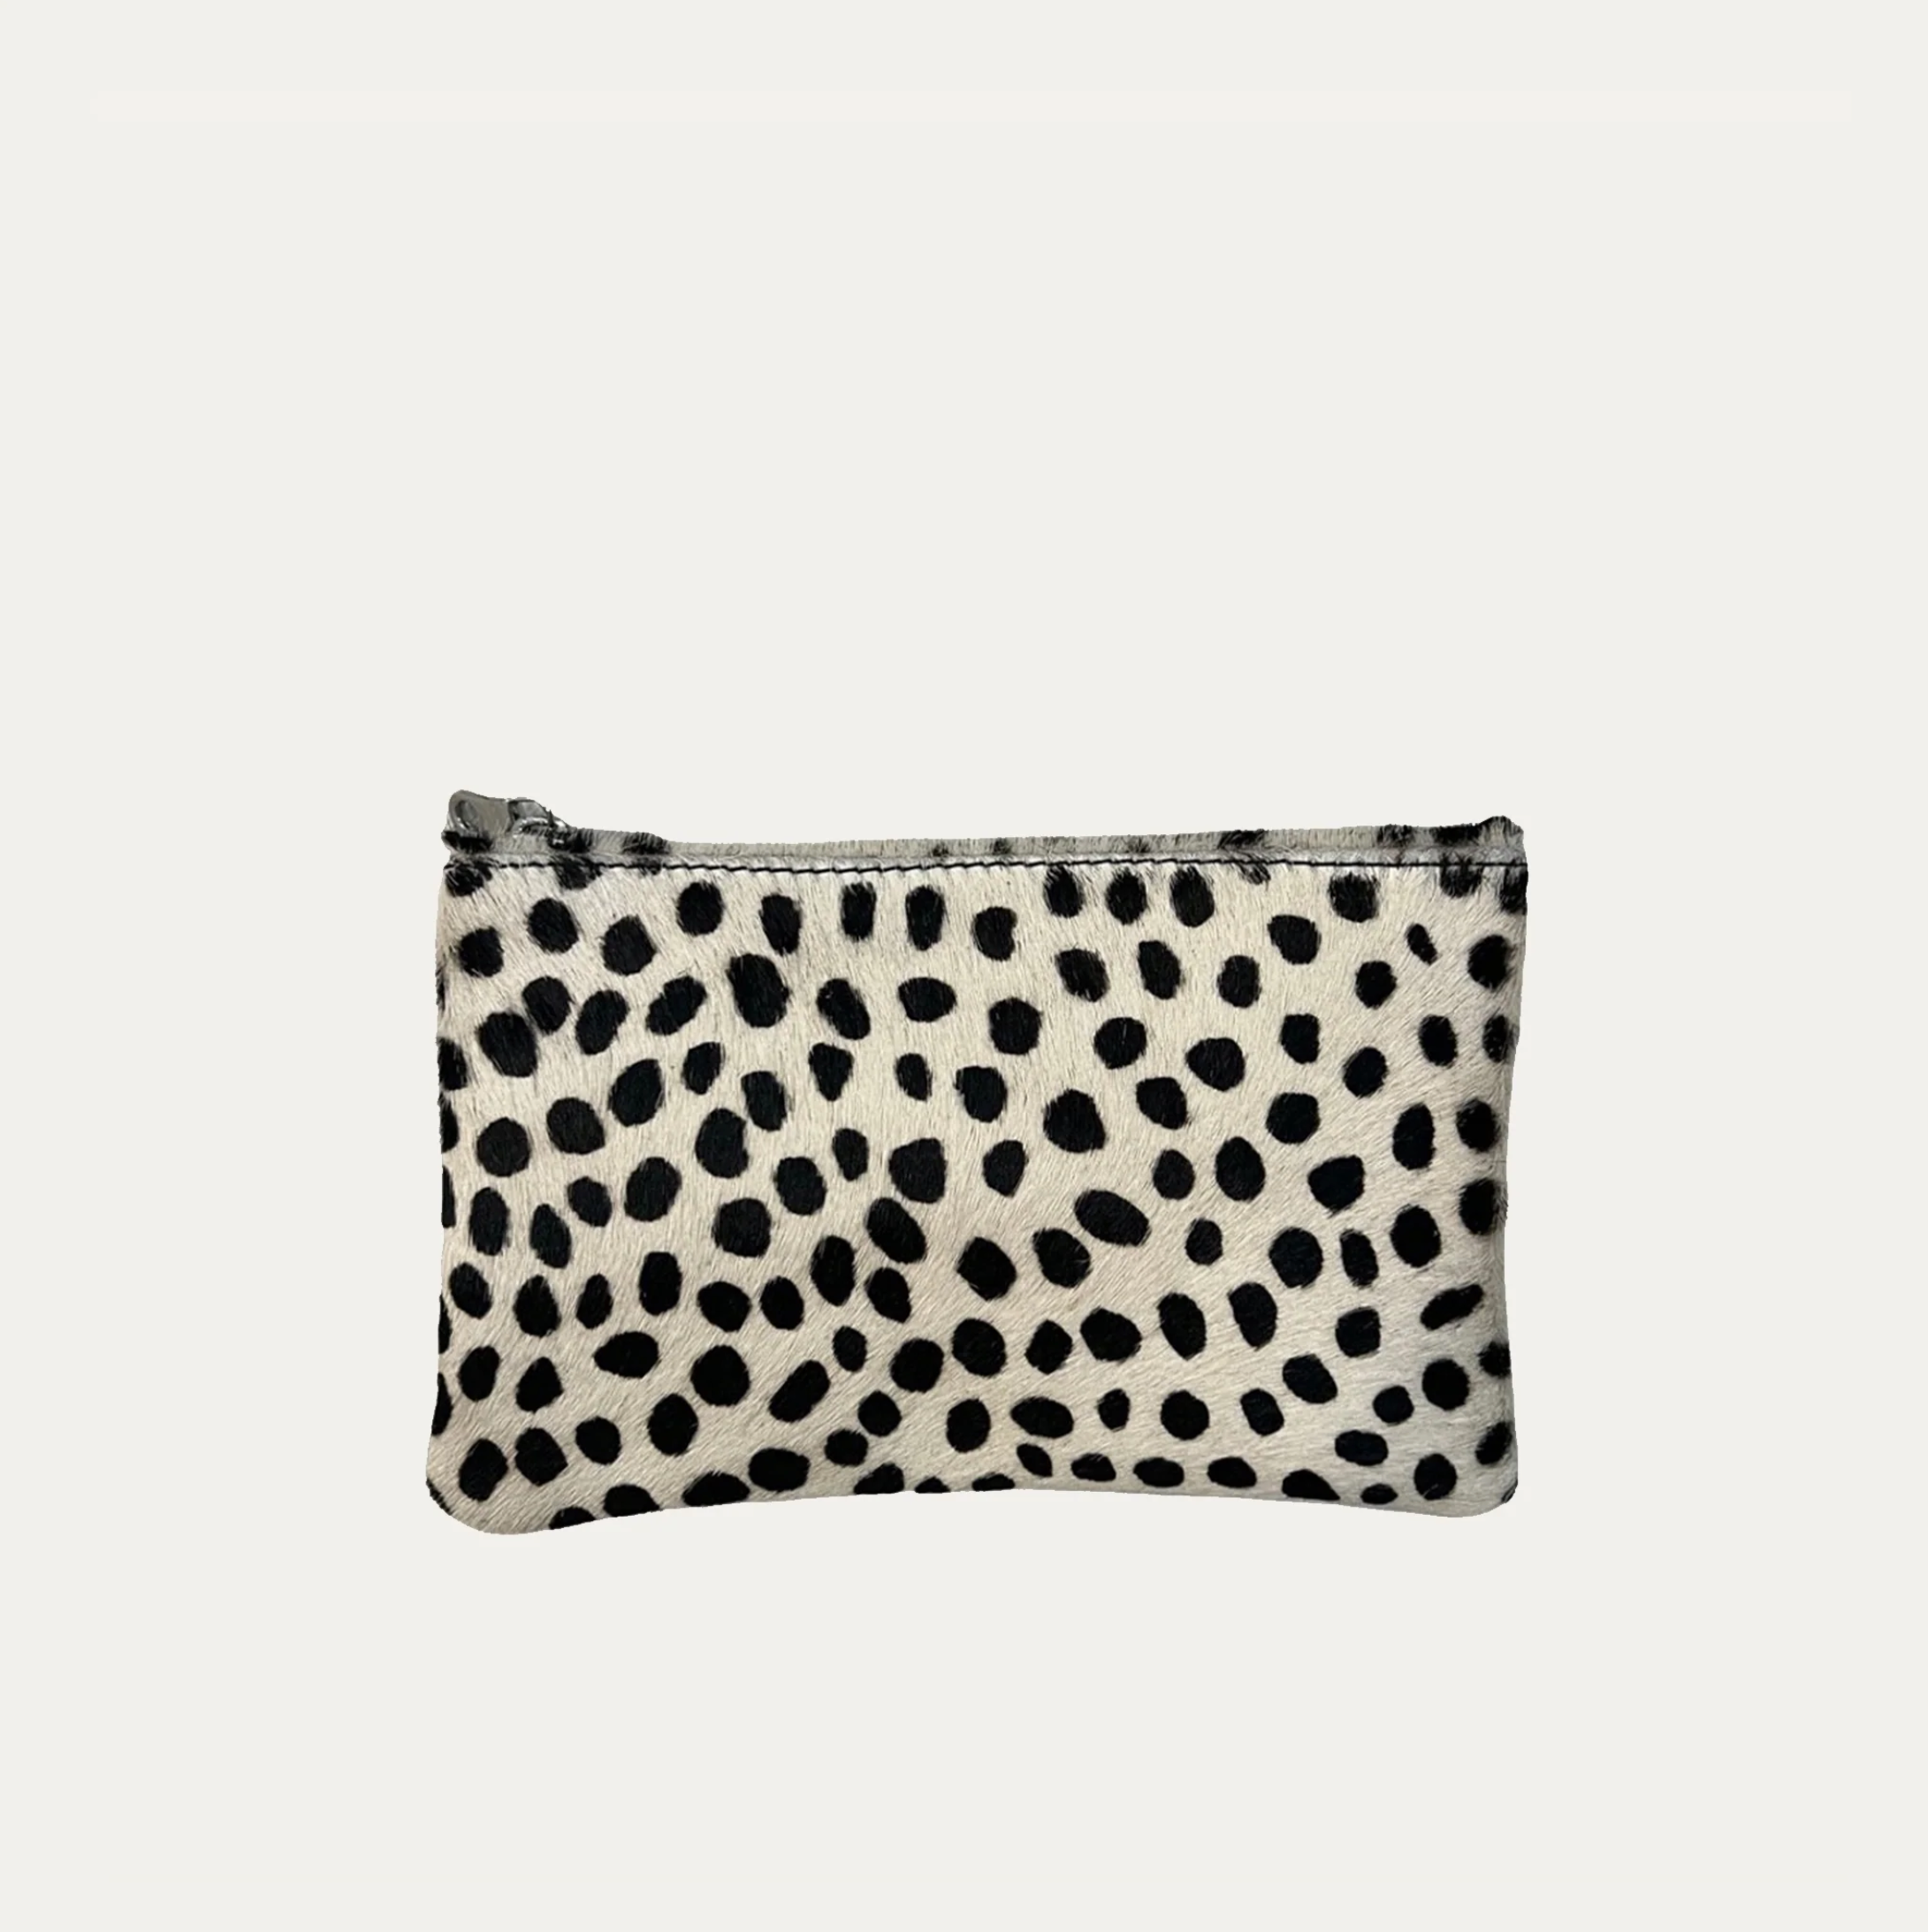 Pauly Pouch Organizer | Black and White Cheetah + Silver Hardware